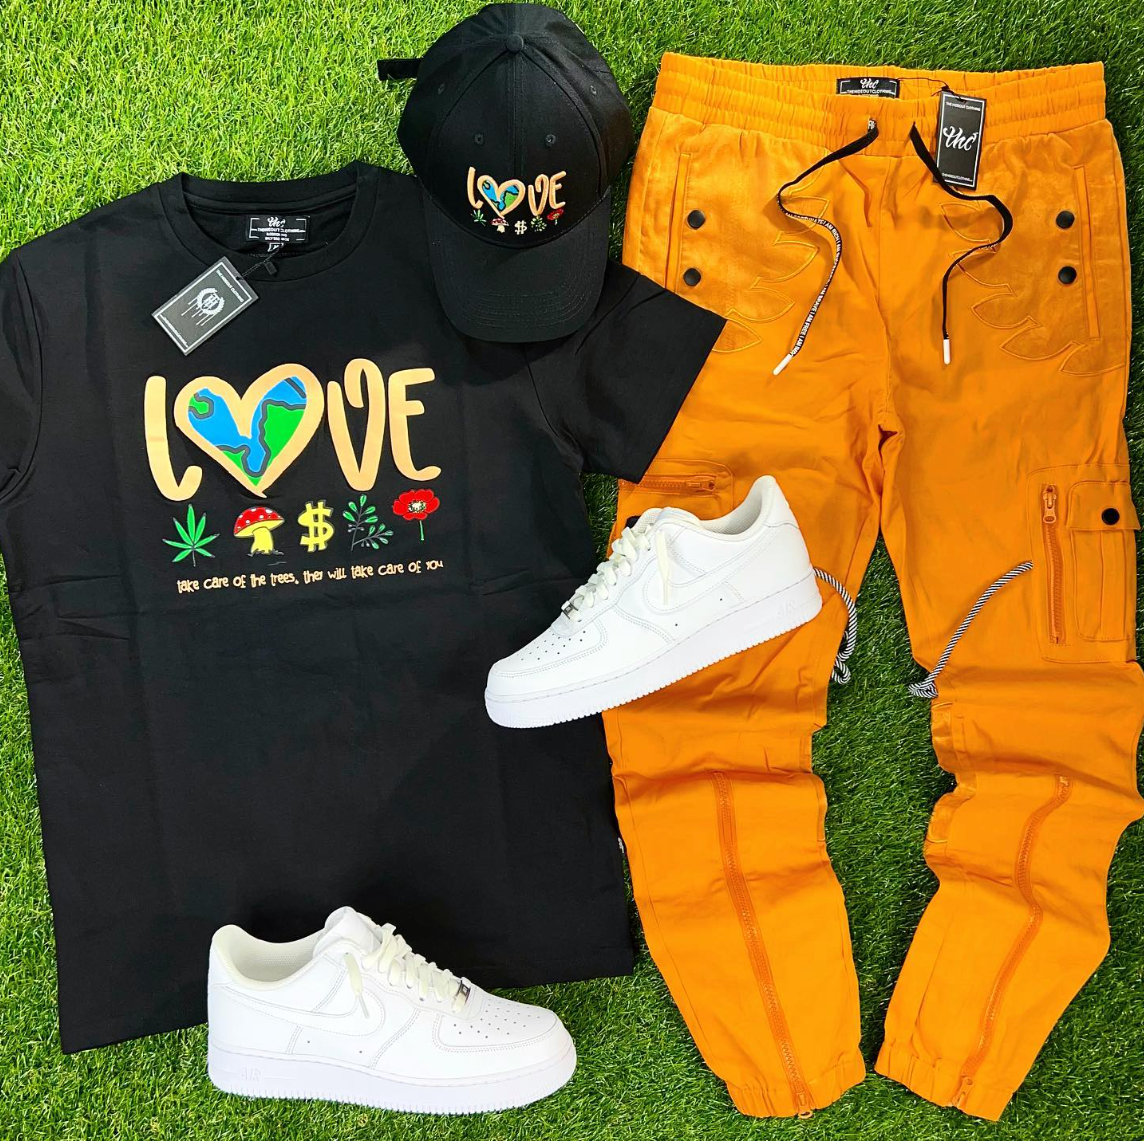 Men, Boys, Teens, Gifts, Wmns, Girls, Urban, Style, Fashion, Blossom Cargo Joggers Pants, Cargo Pants, Joggers, Pants, Orange Pants, Orange Joggers, Orange Cargo Pants, Soft Orange, The Hideout Clothing, 